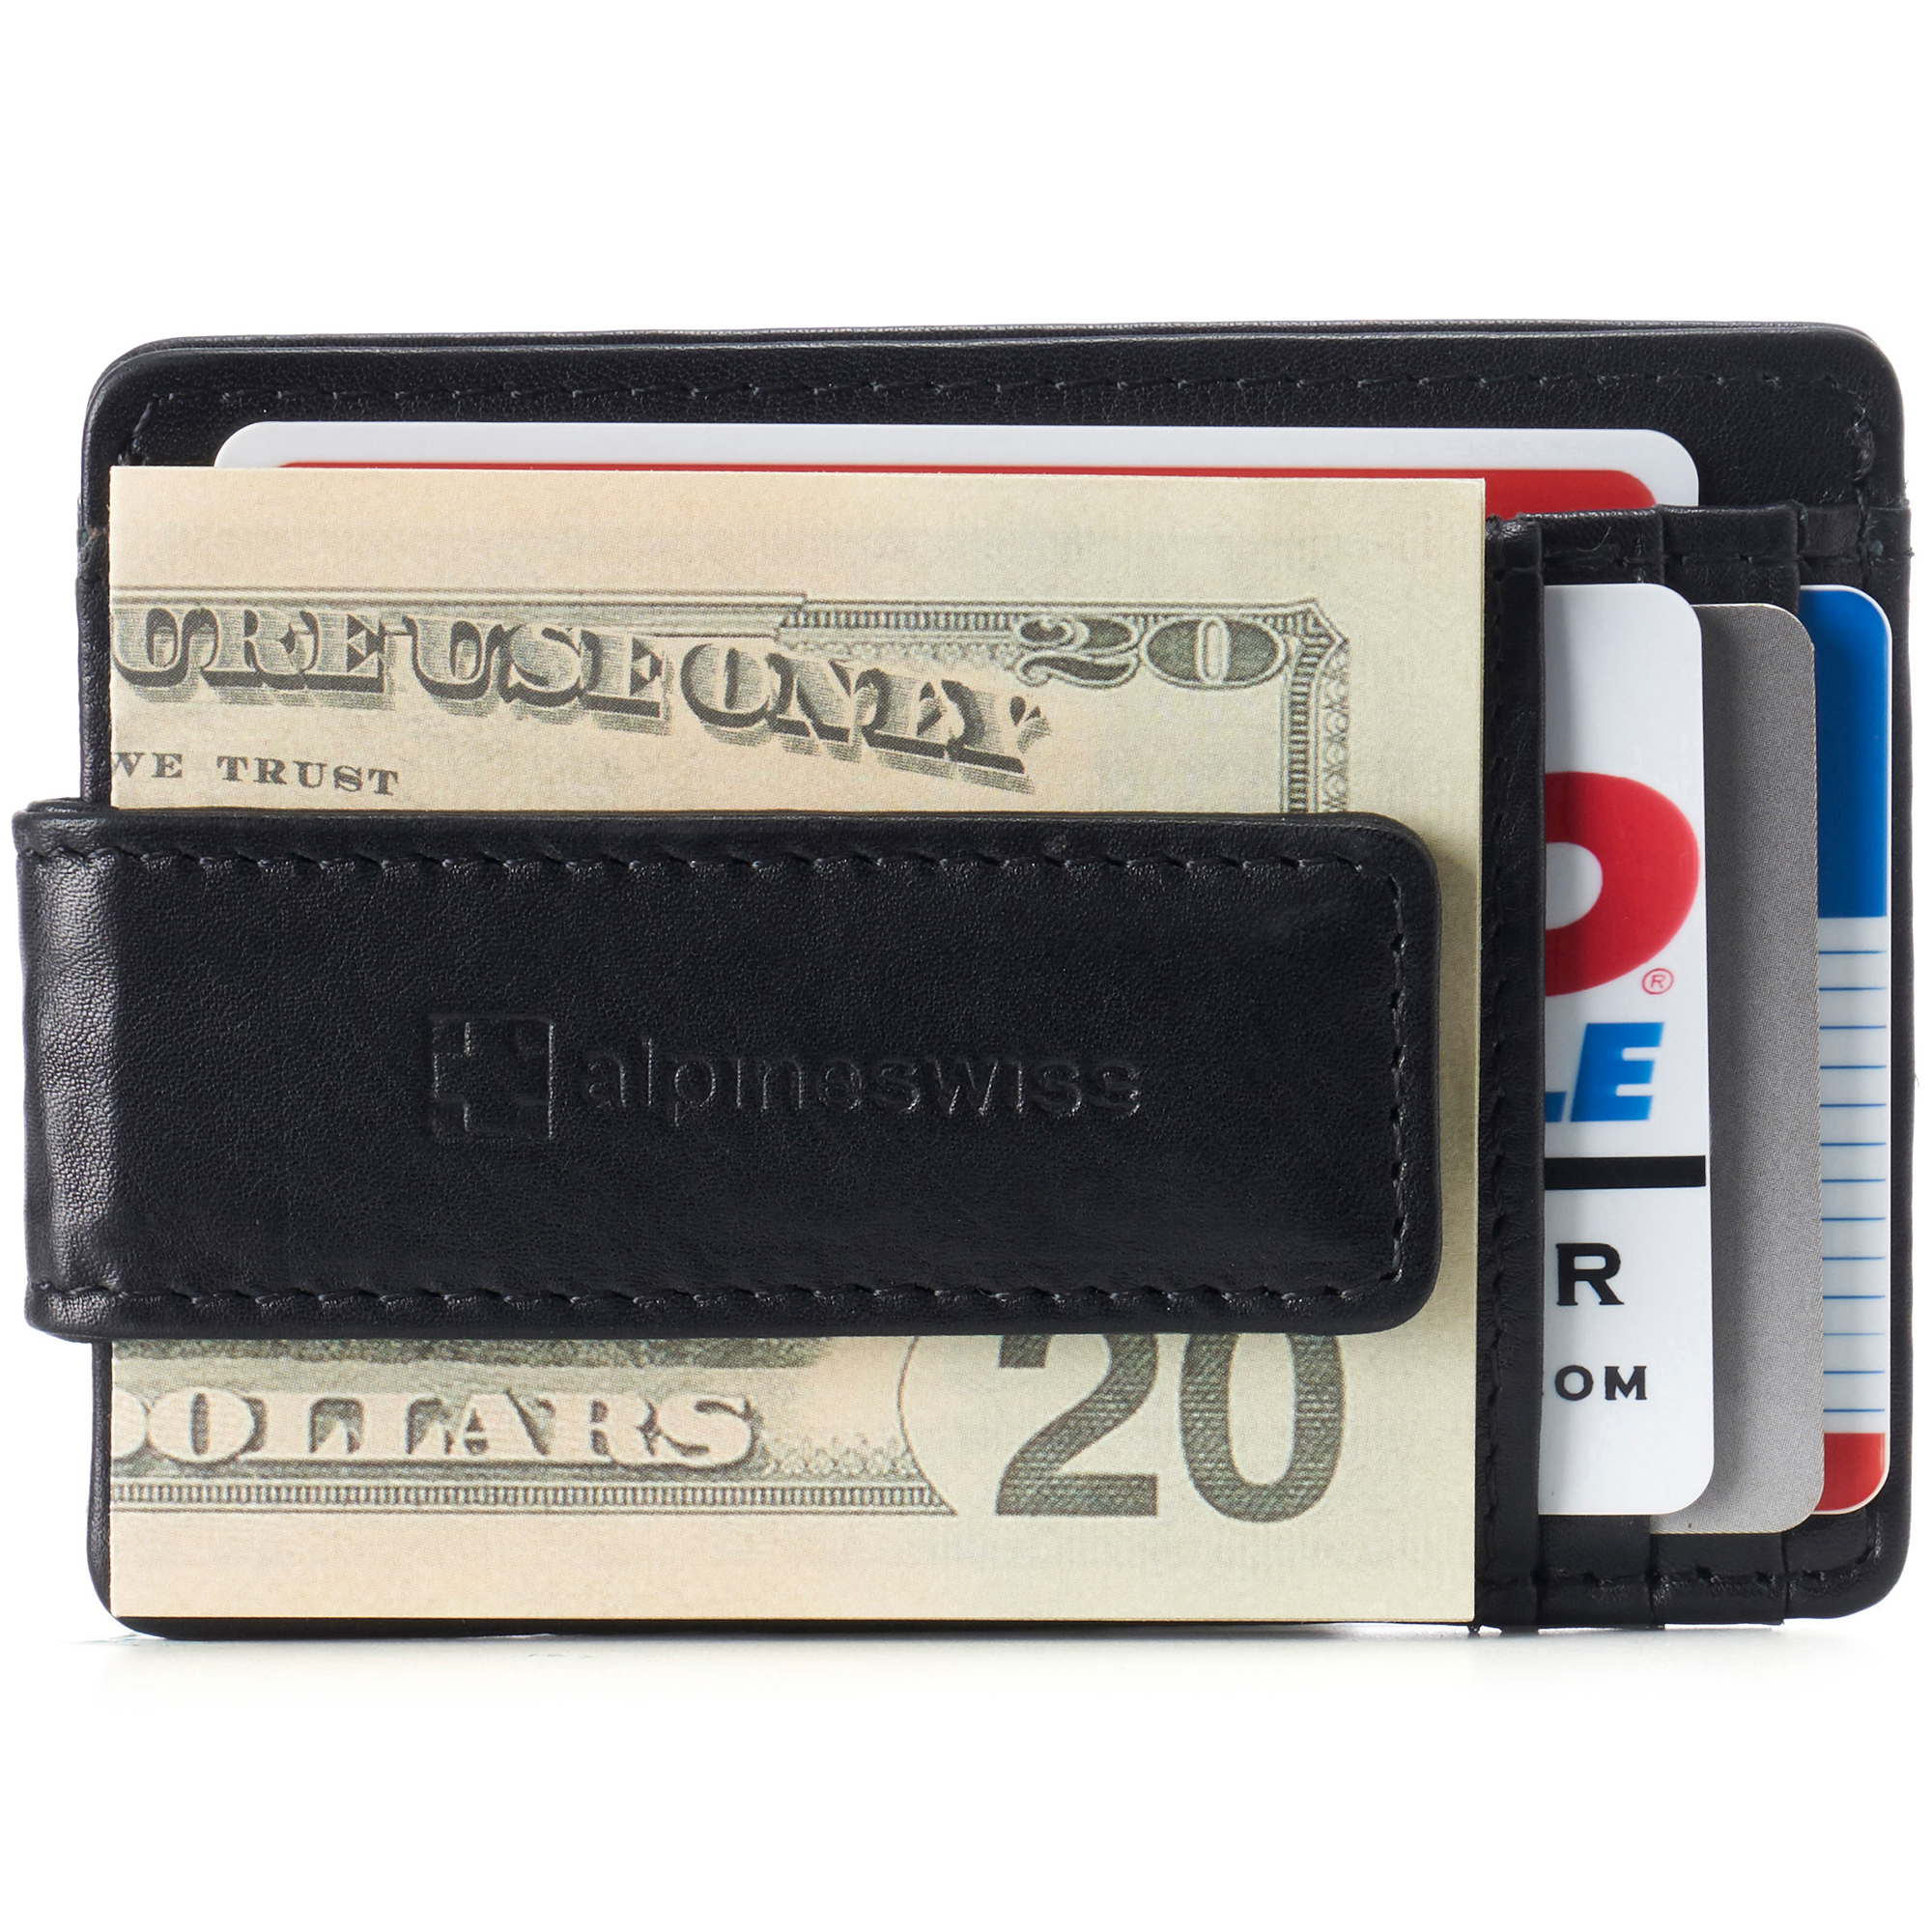 gifts for men  Leather money clip wallet, Leather money clips, Men's shoes  accessories